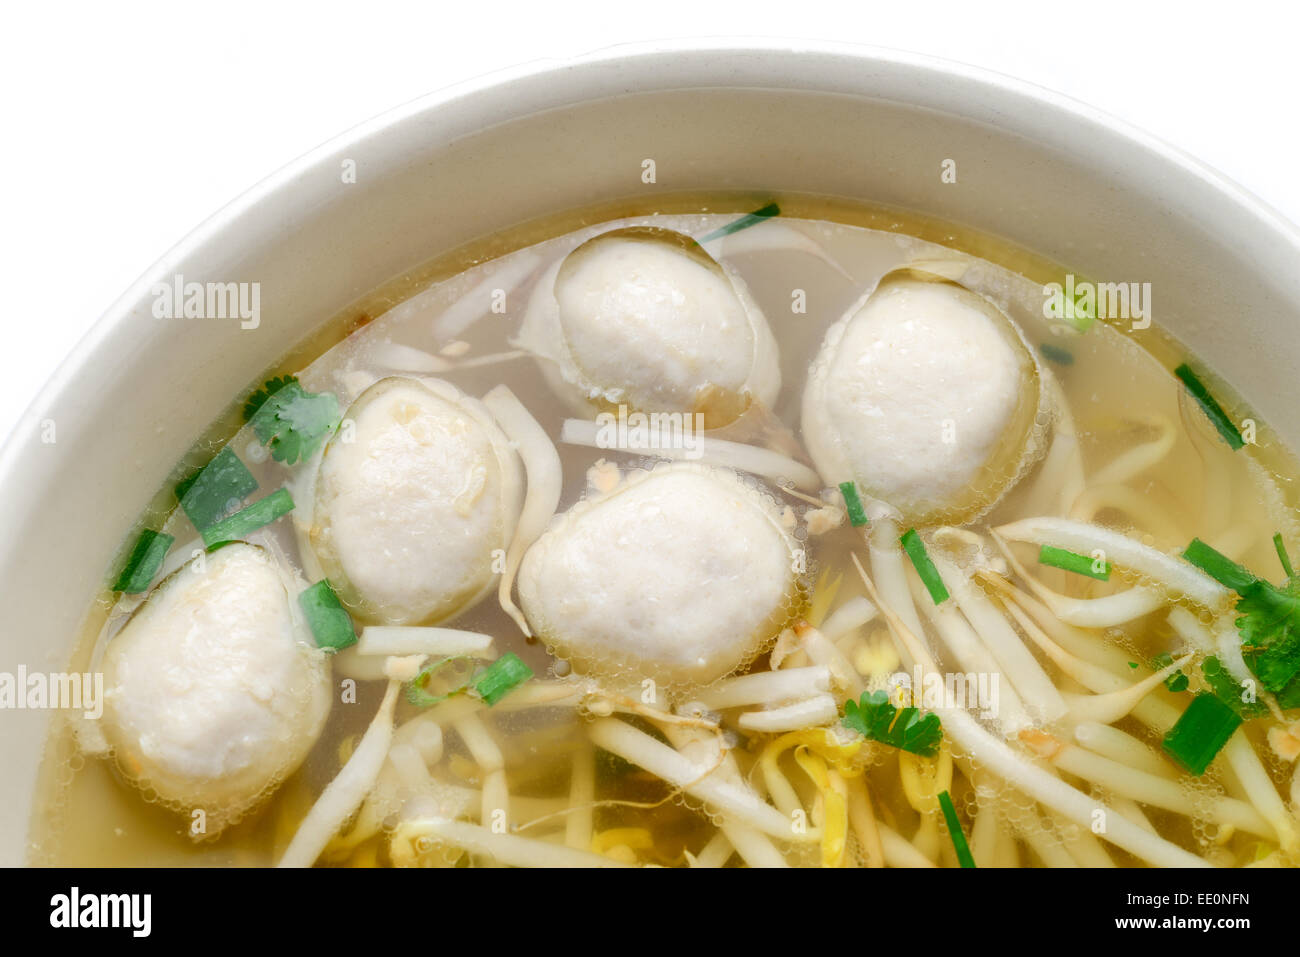 noodles soup with meat ball, bean sprouts Stock Photo